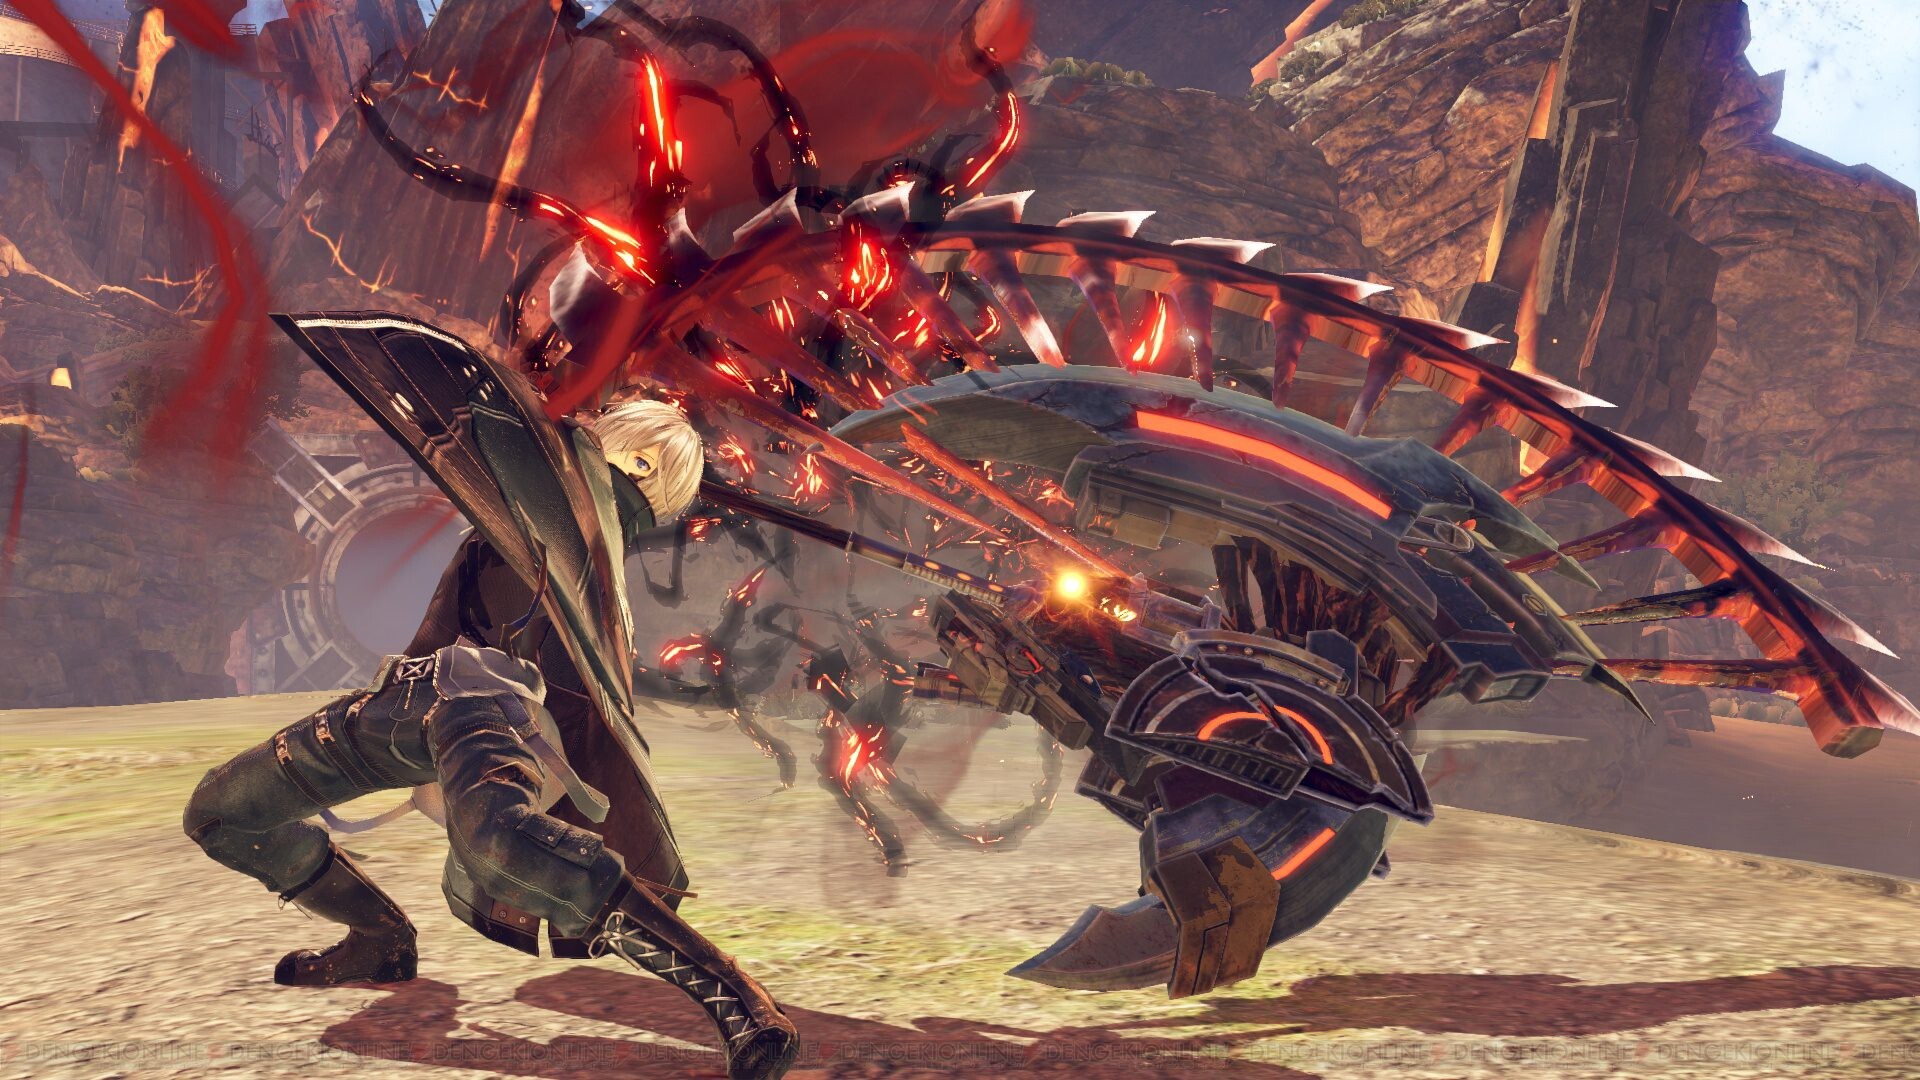 God Eater (Game): A sci-fi action role-playing series released on February 4, 2010 for the PlayStation Portable. 1920x1080 Full HD Background.